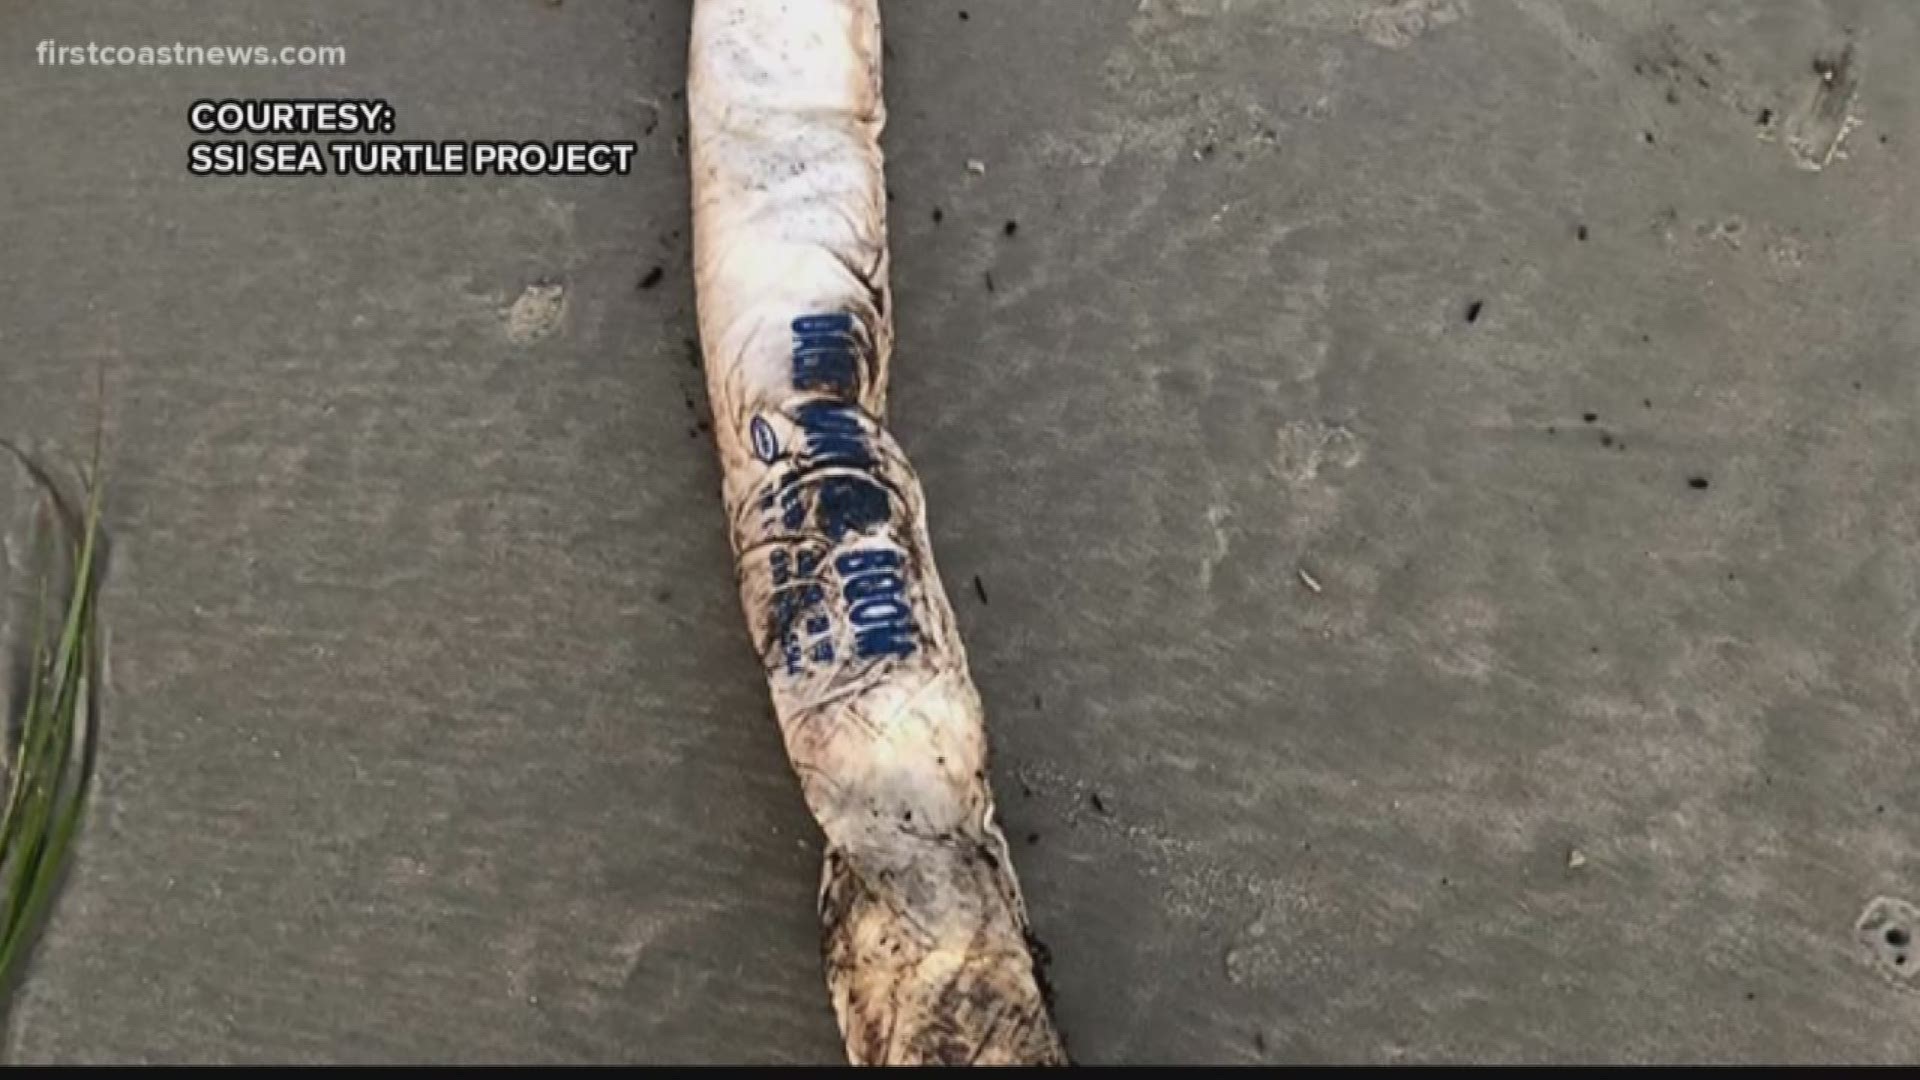 Oil boom materials from the Golden Ray incident are making it to shore along Georgia's coast. They were first noticed by volunteers with the St. Simons Sea Turtle Project.